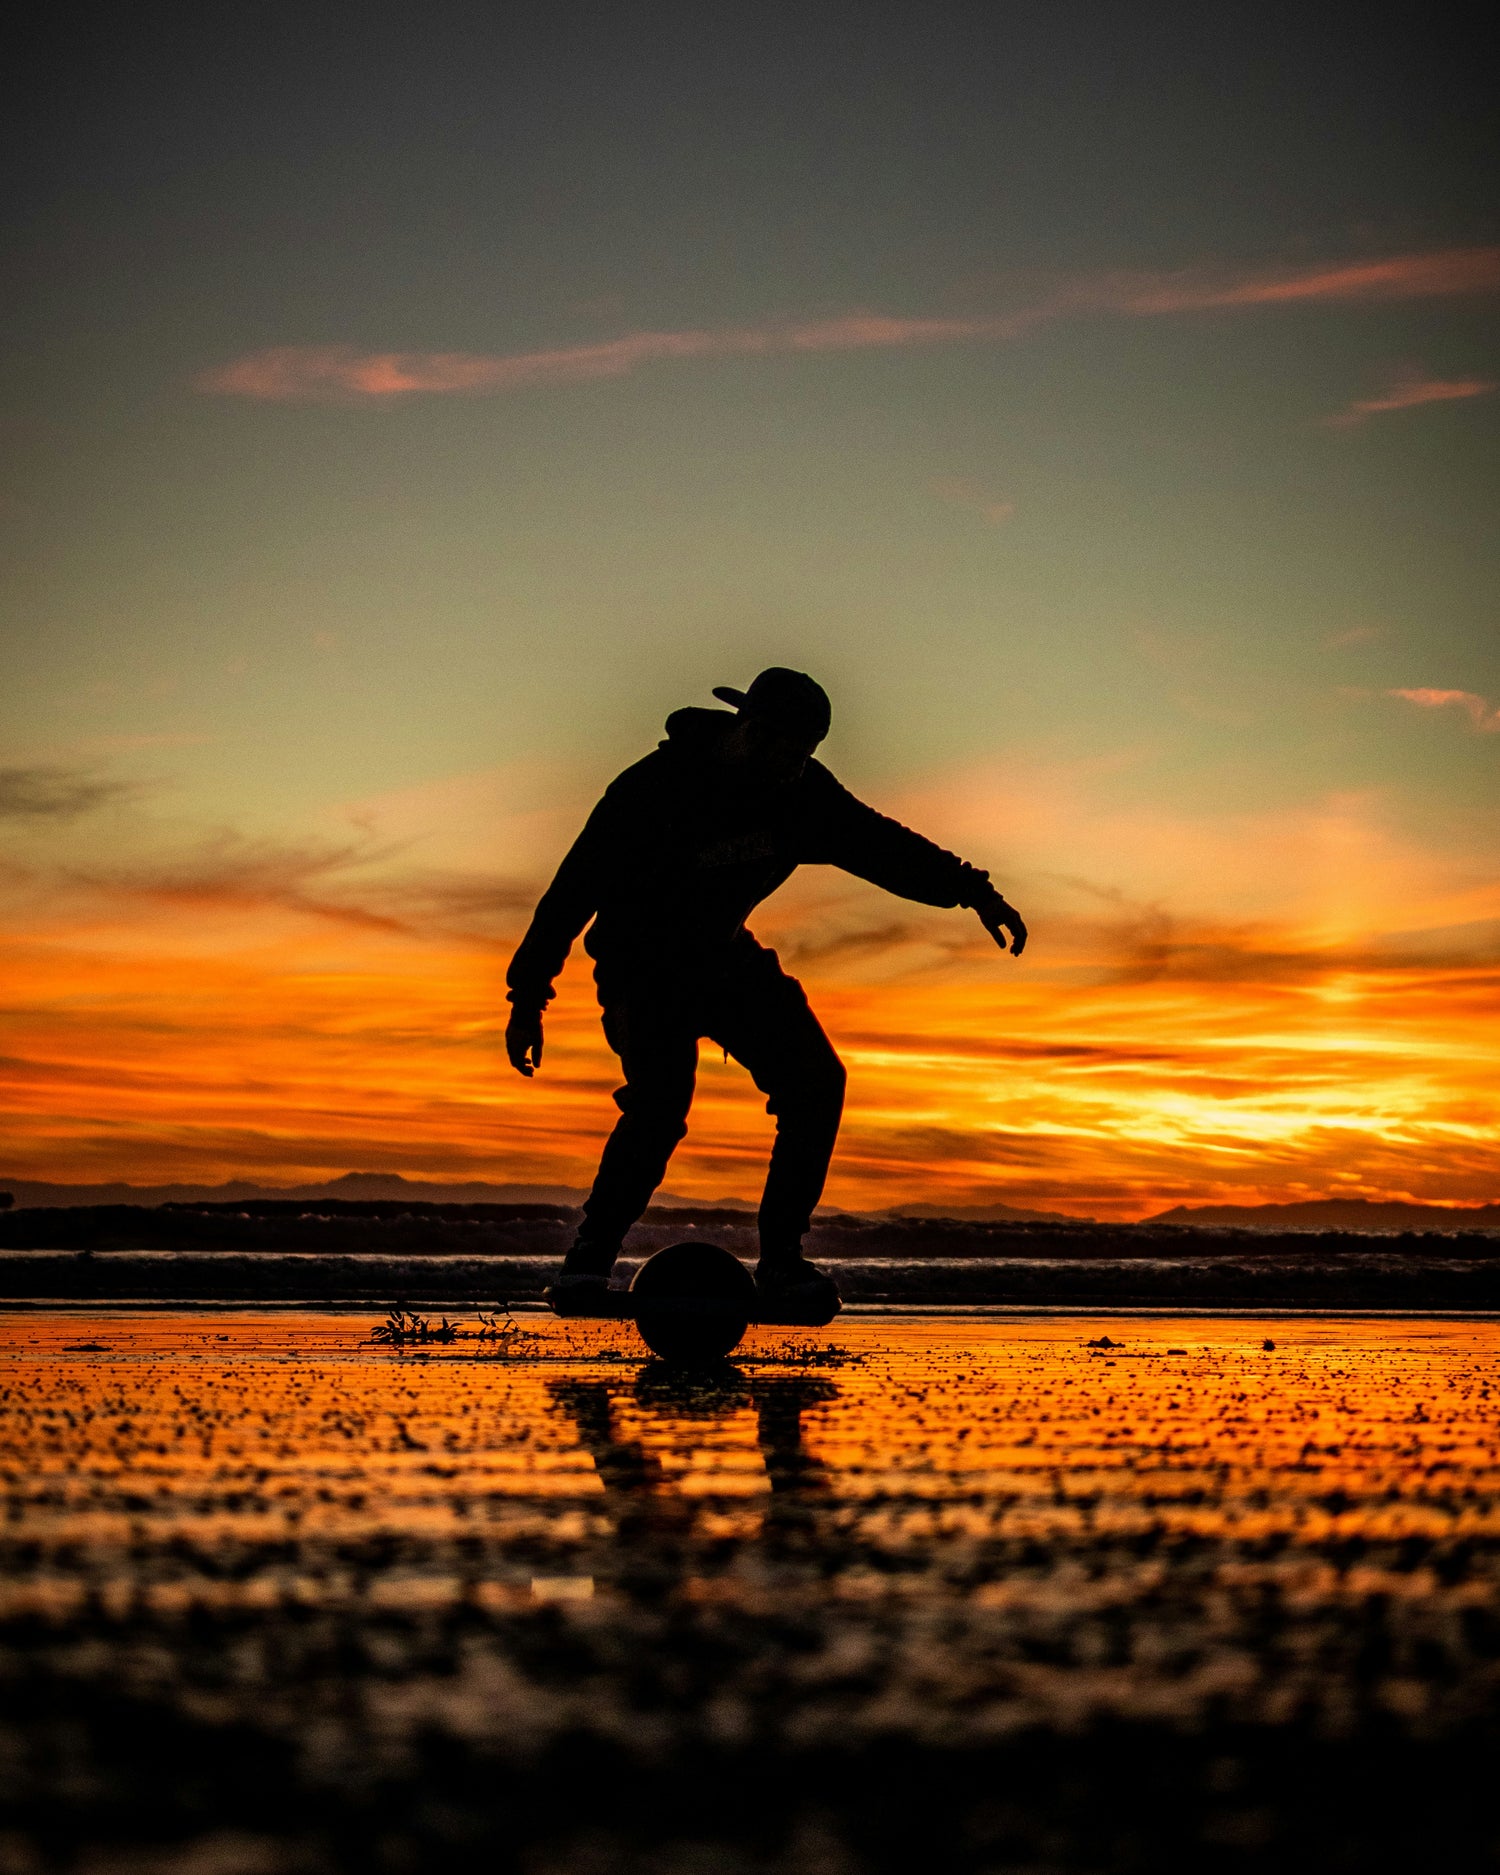 a man riding a onewheel on the beach during sunset